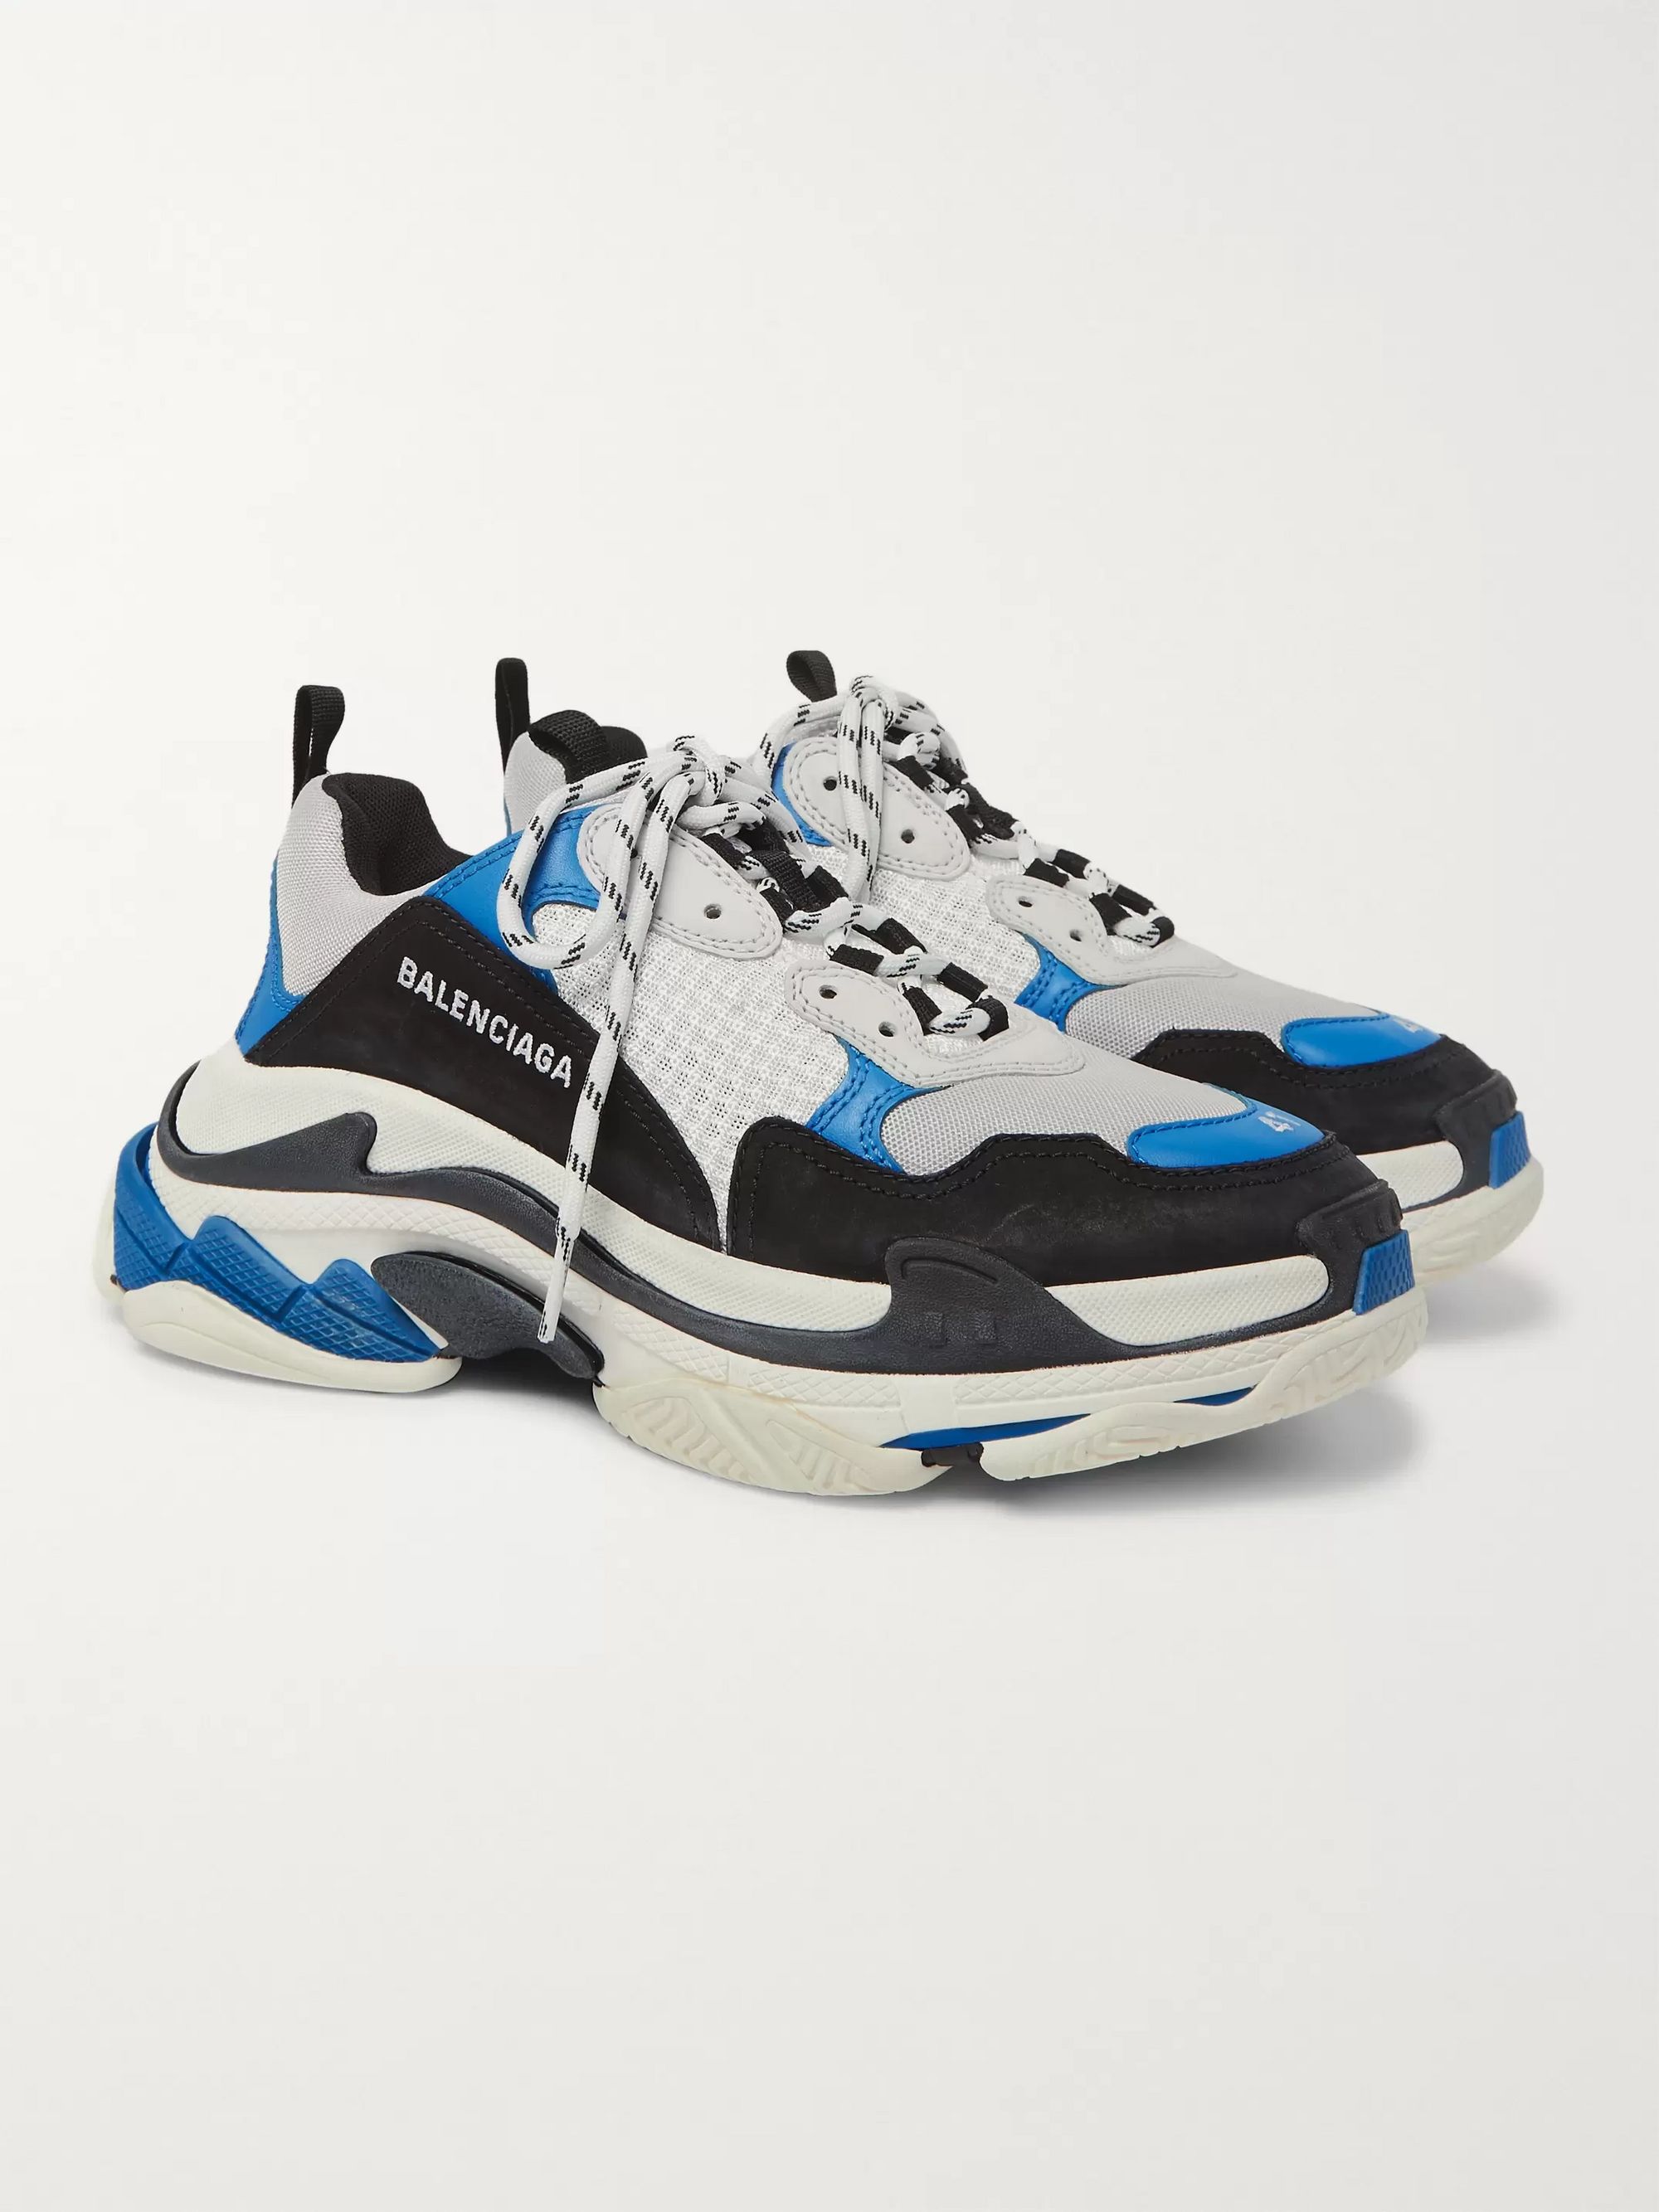 Balenciaga Triple S Pre Order Now Available at Colette in